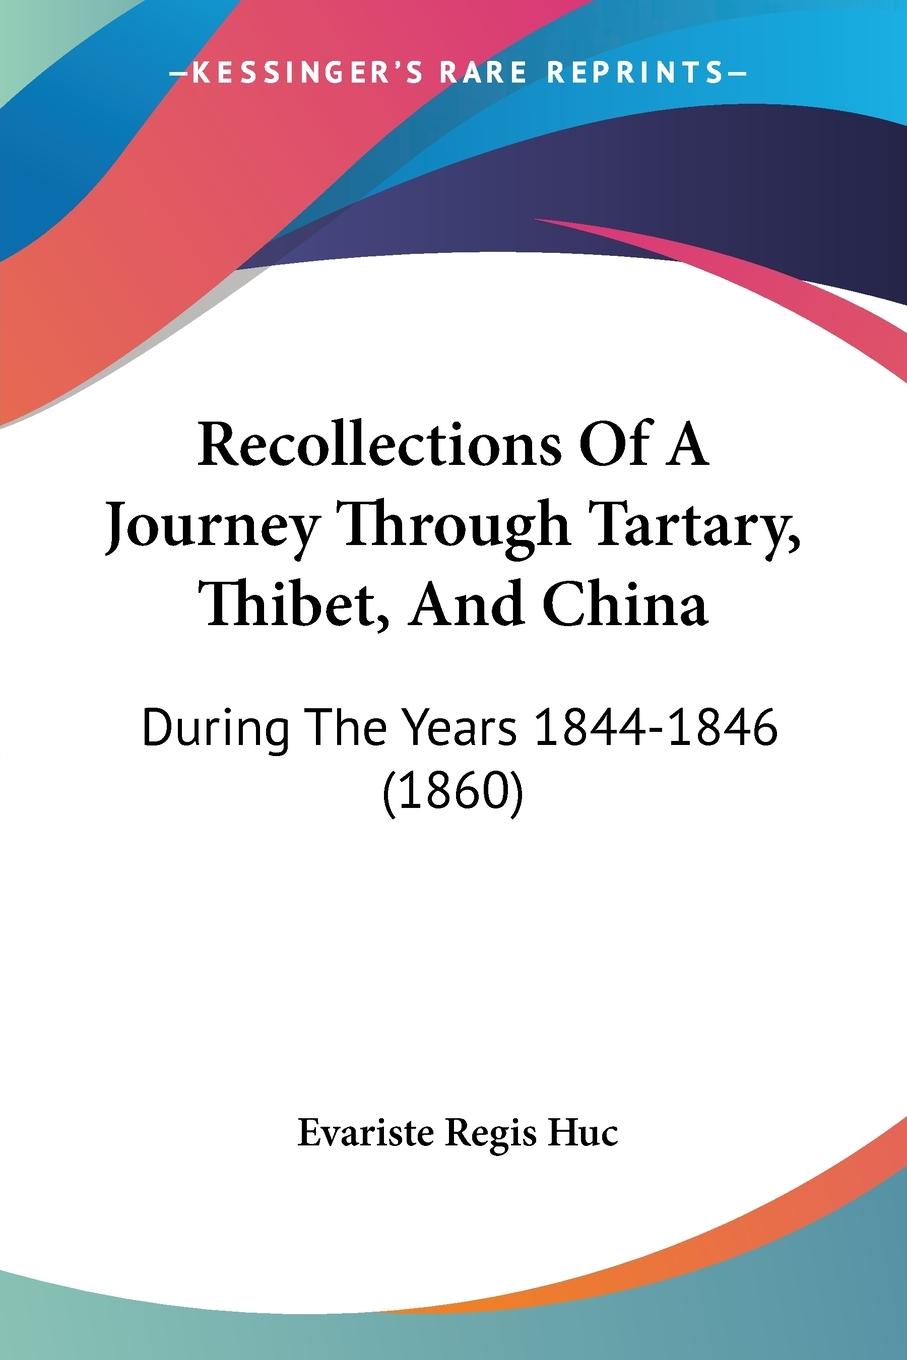 Recollections Of A Journey Through Tartary, Thibet, And China - Huc, Evariste Regis